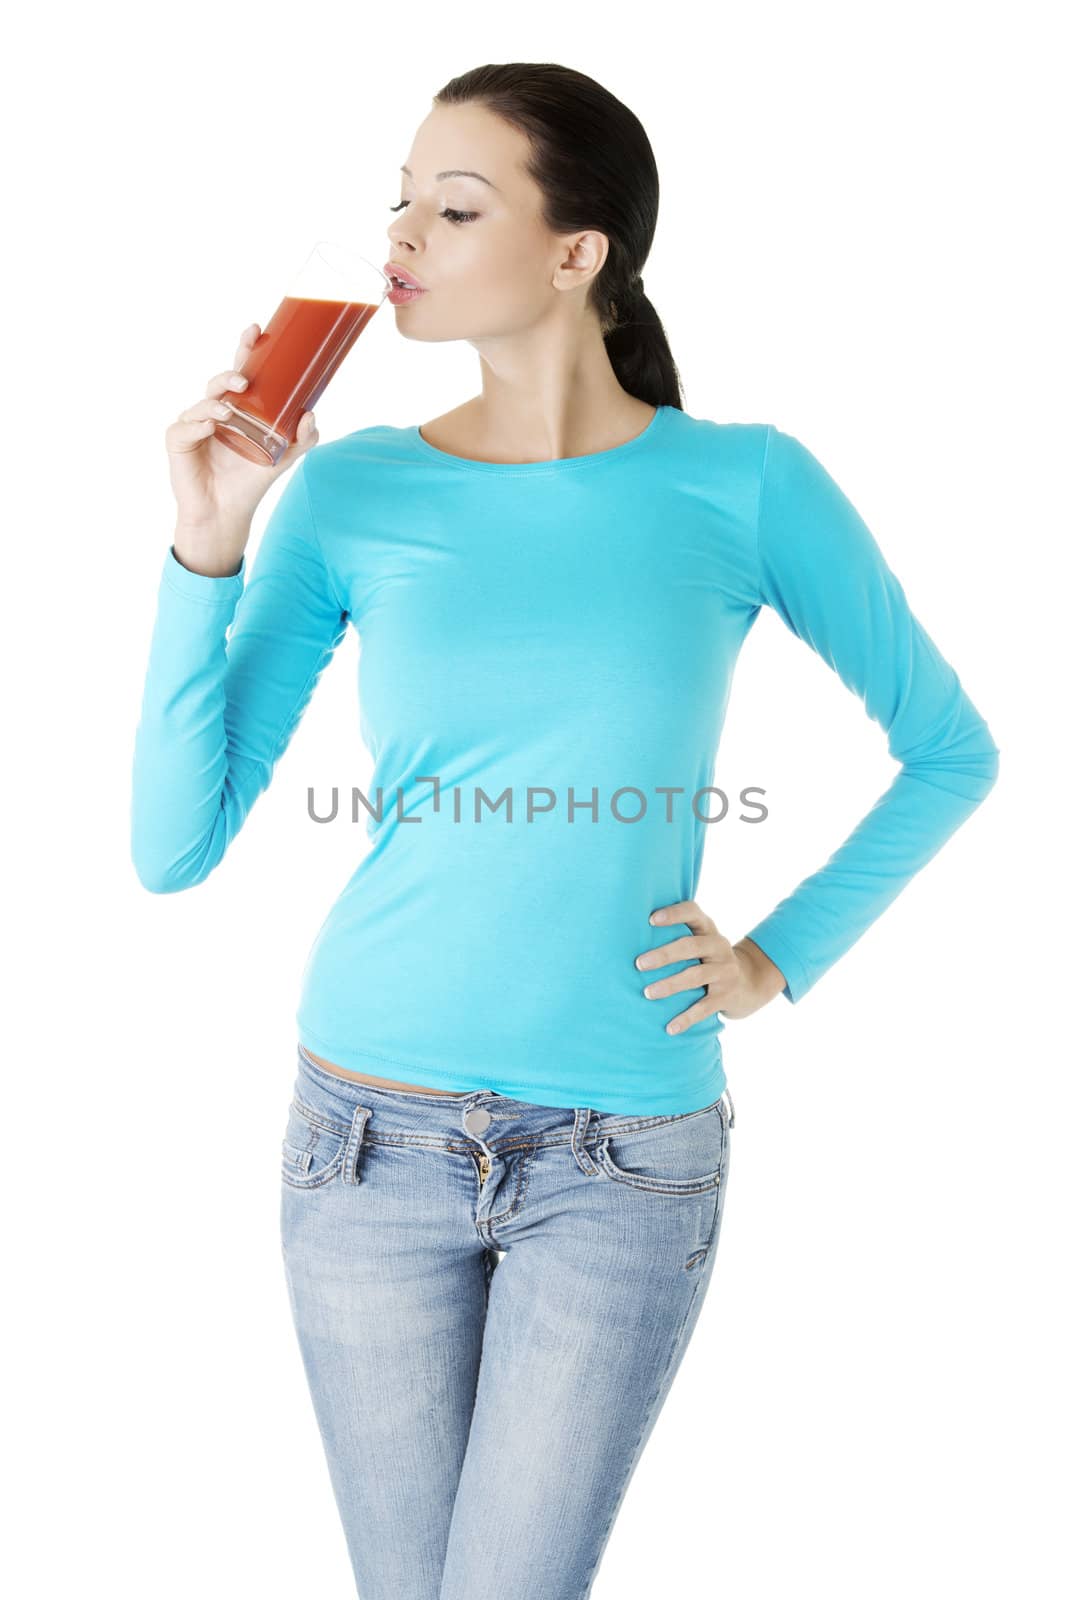 Happy smiling woman drinking tomato juice by BDS